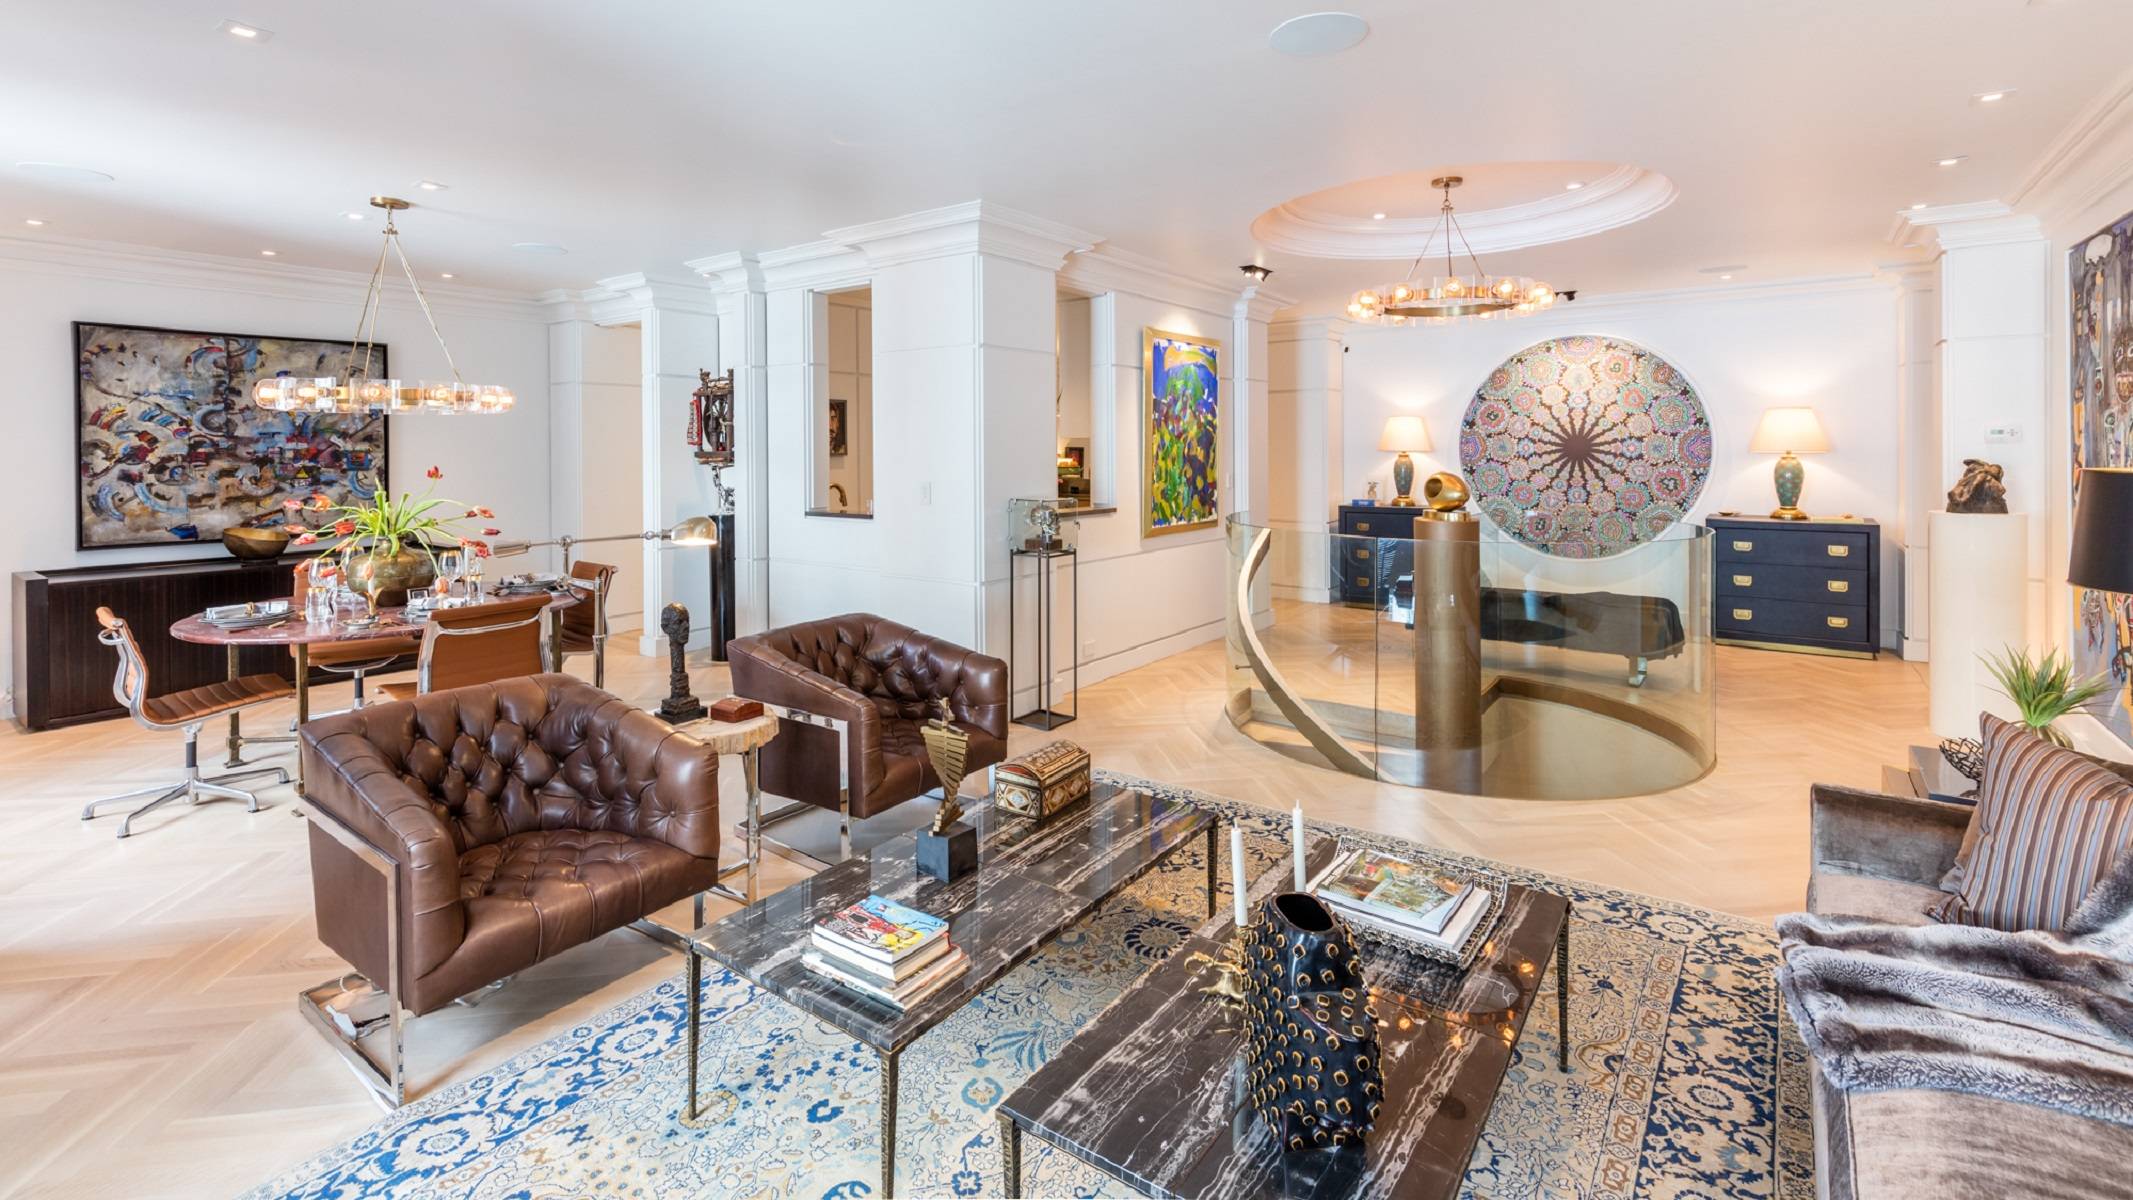 Located at The legendary Ritz Tower, a luxurious Emery Roth residential co op, built in 1926 that offers unrivaled five star white glove service.